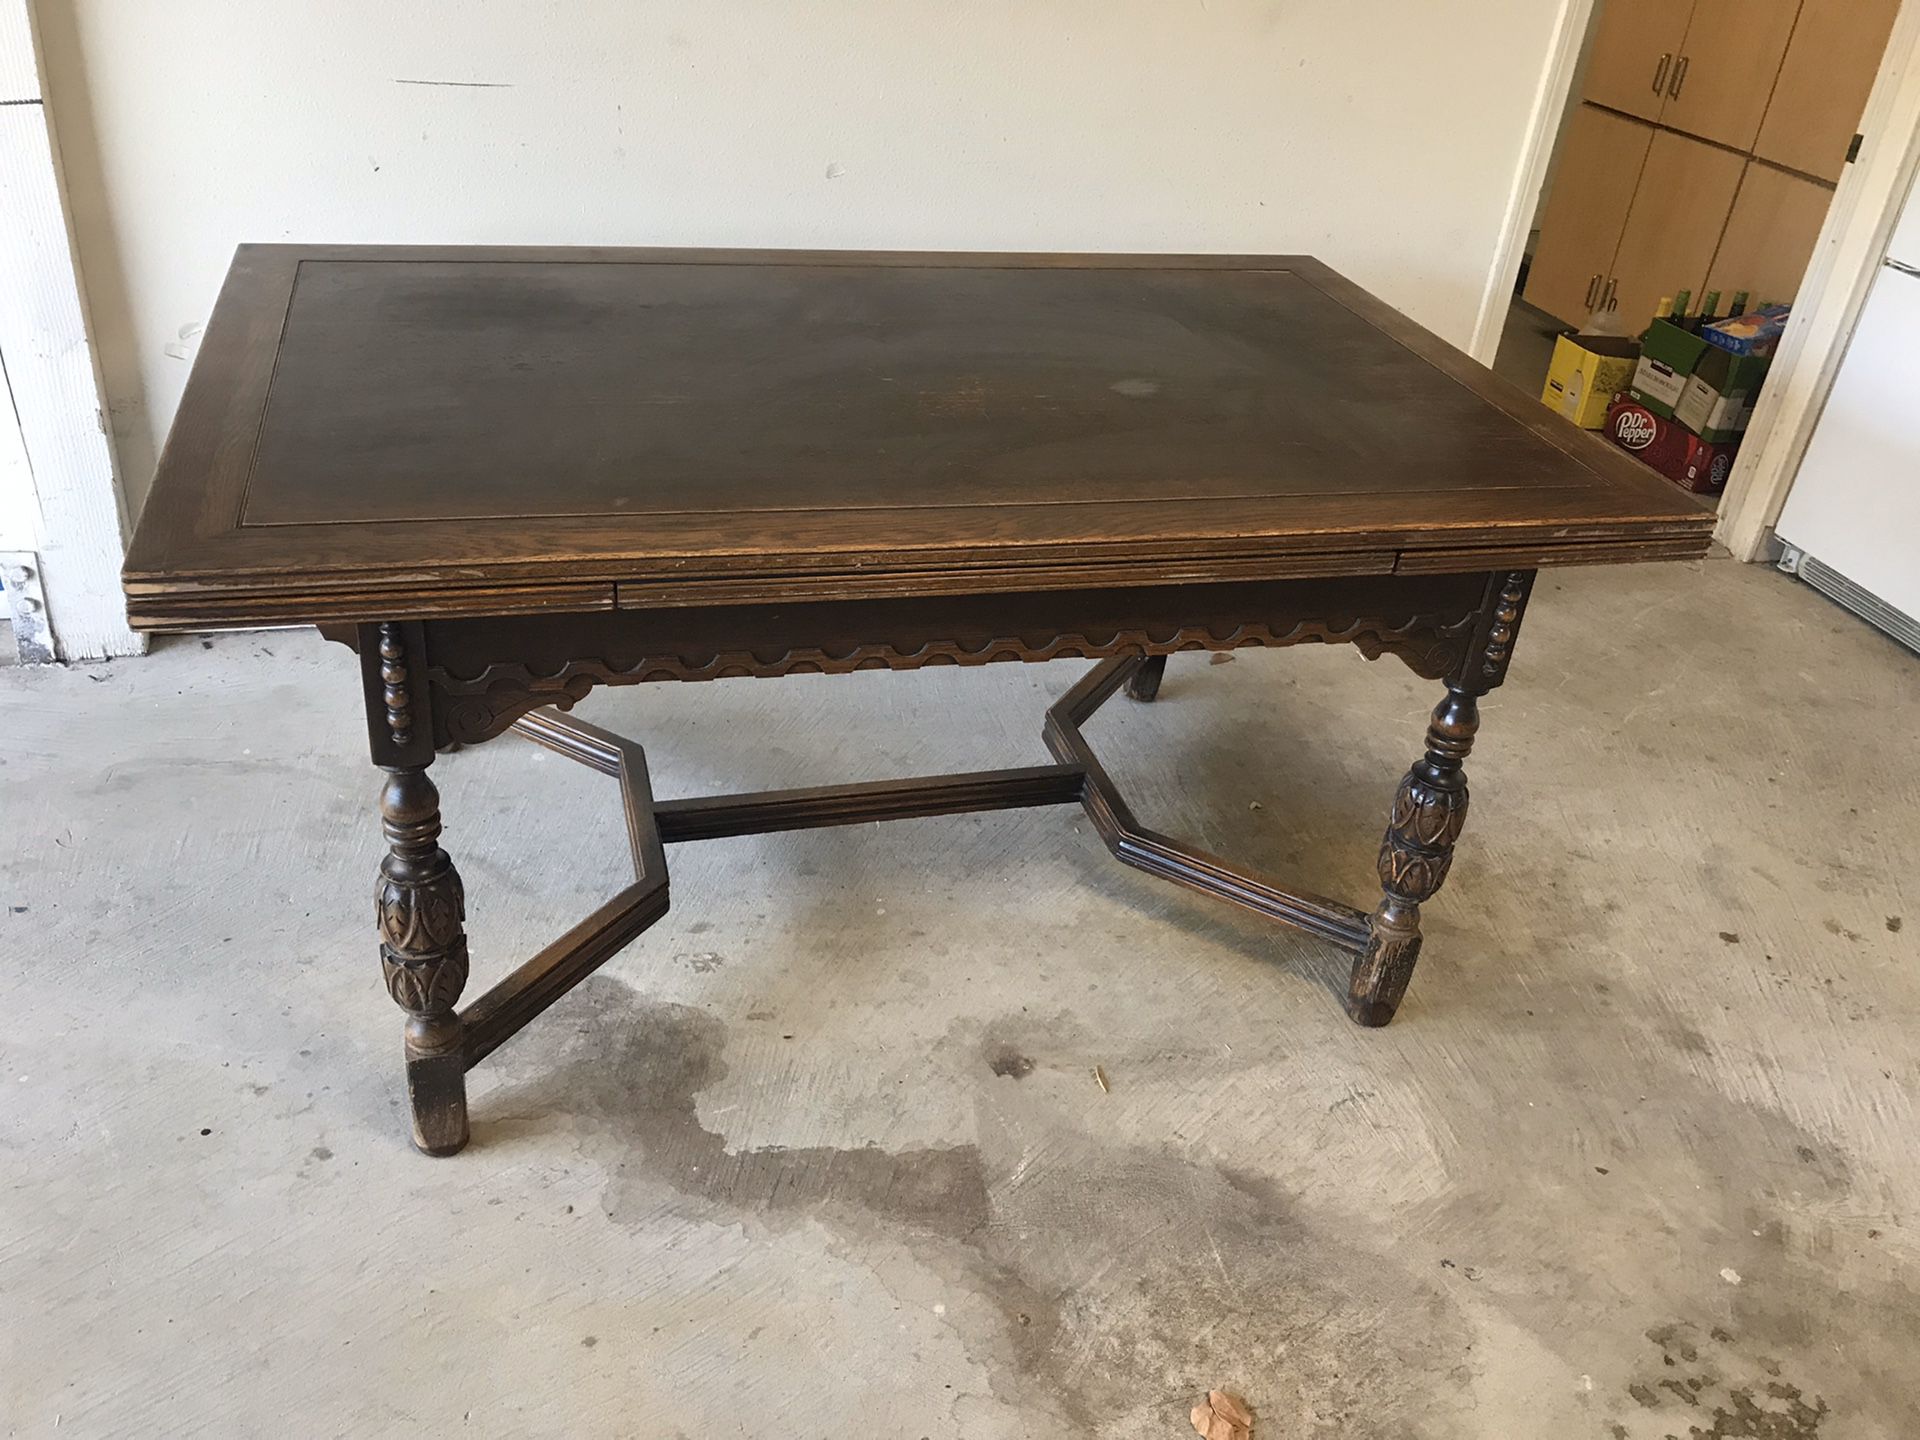 Antique table, chairs, server and hutch